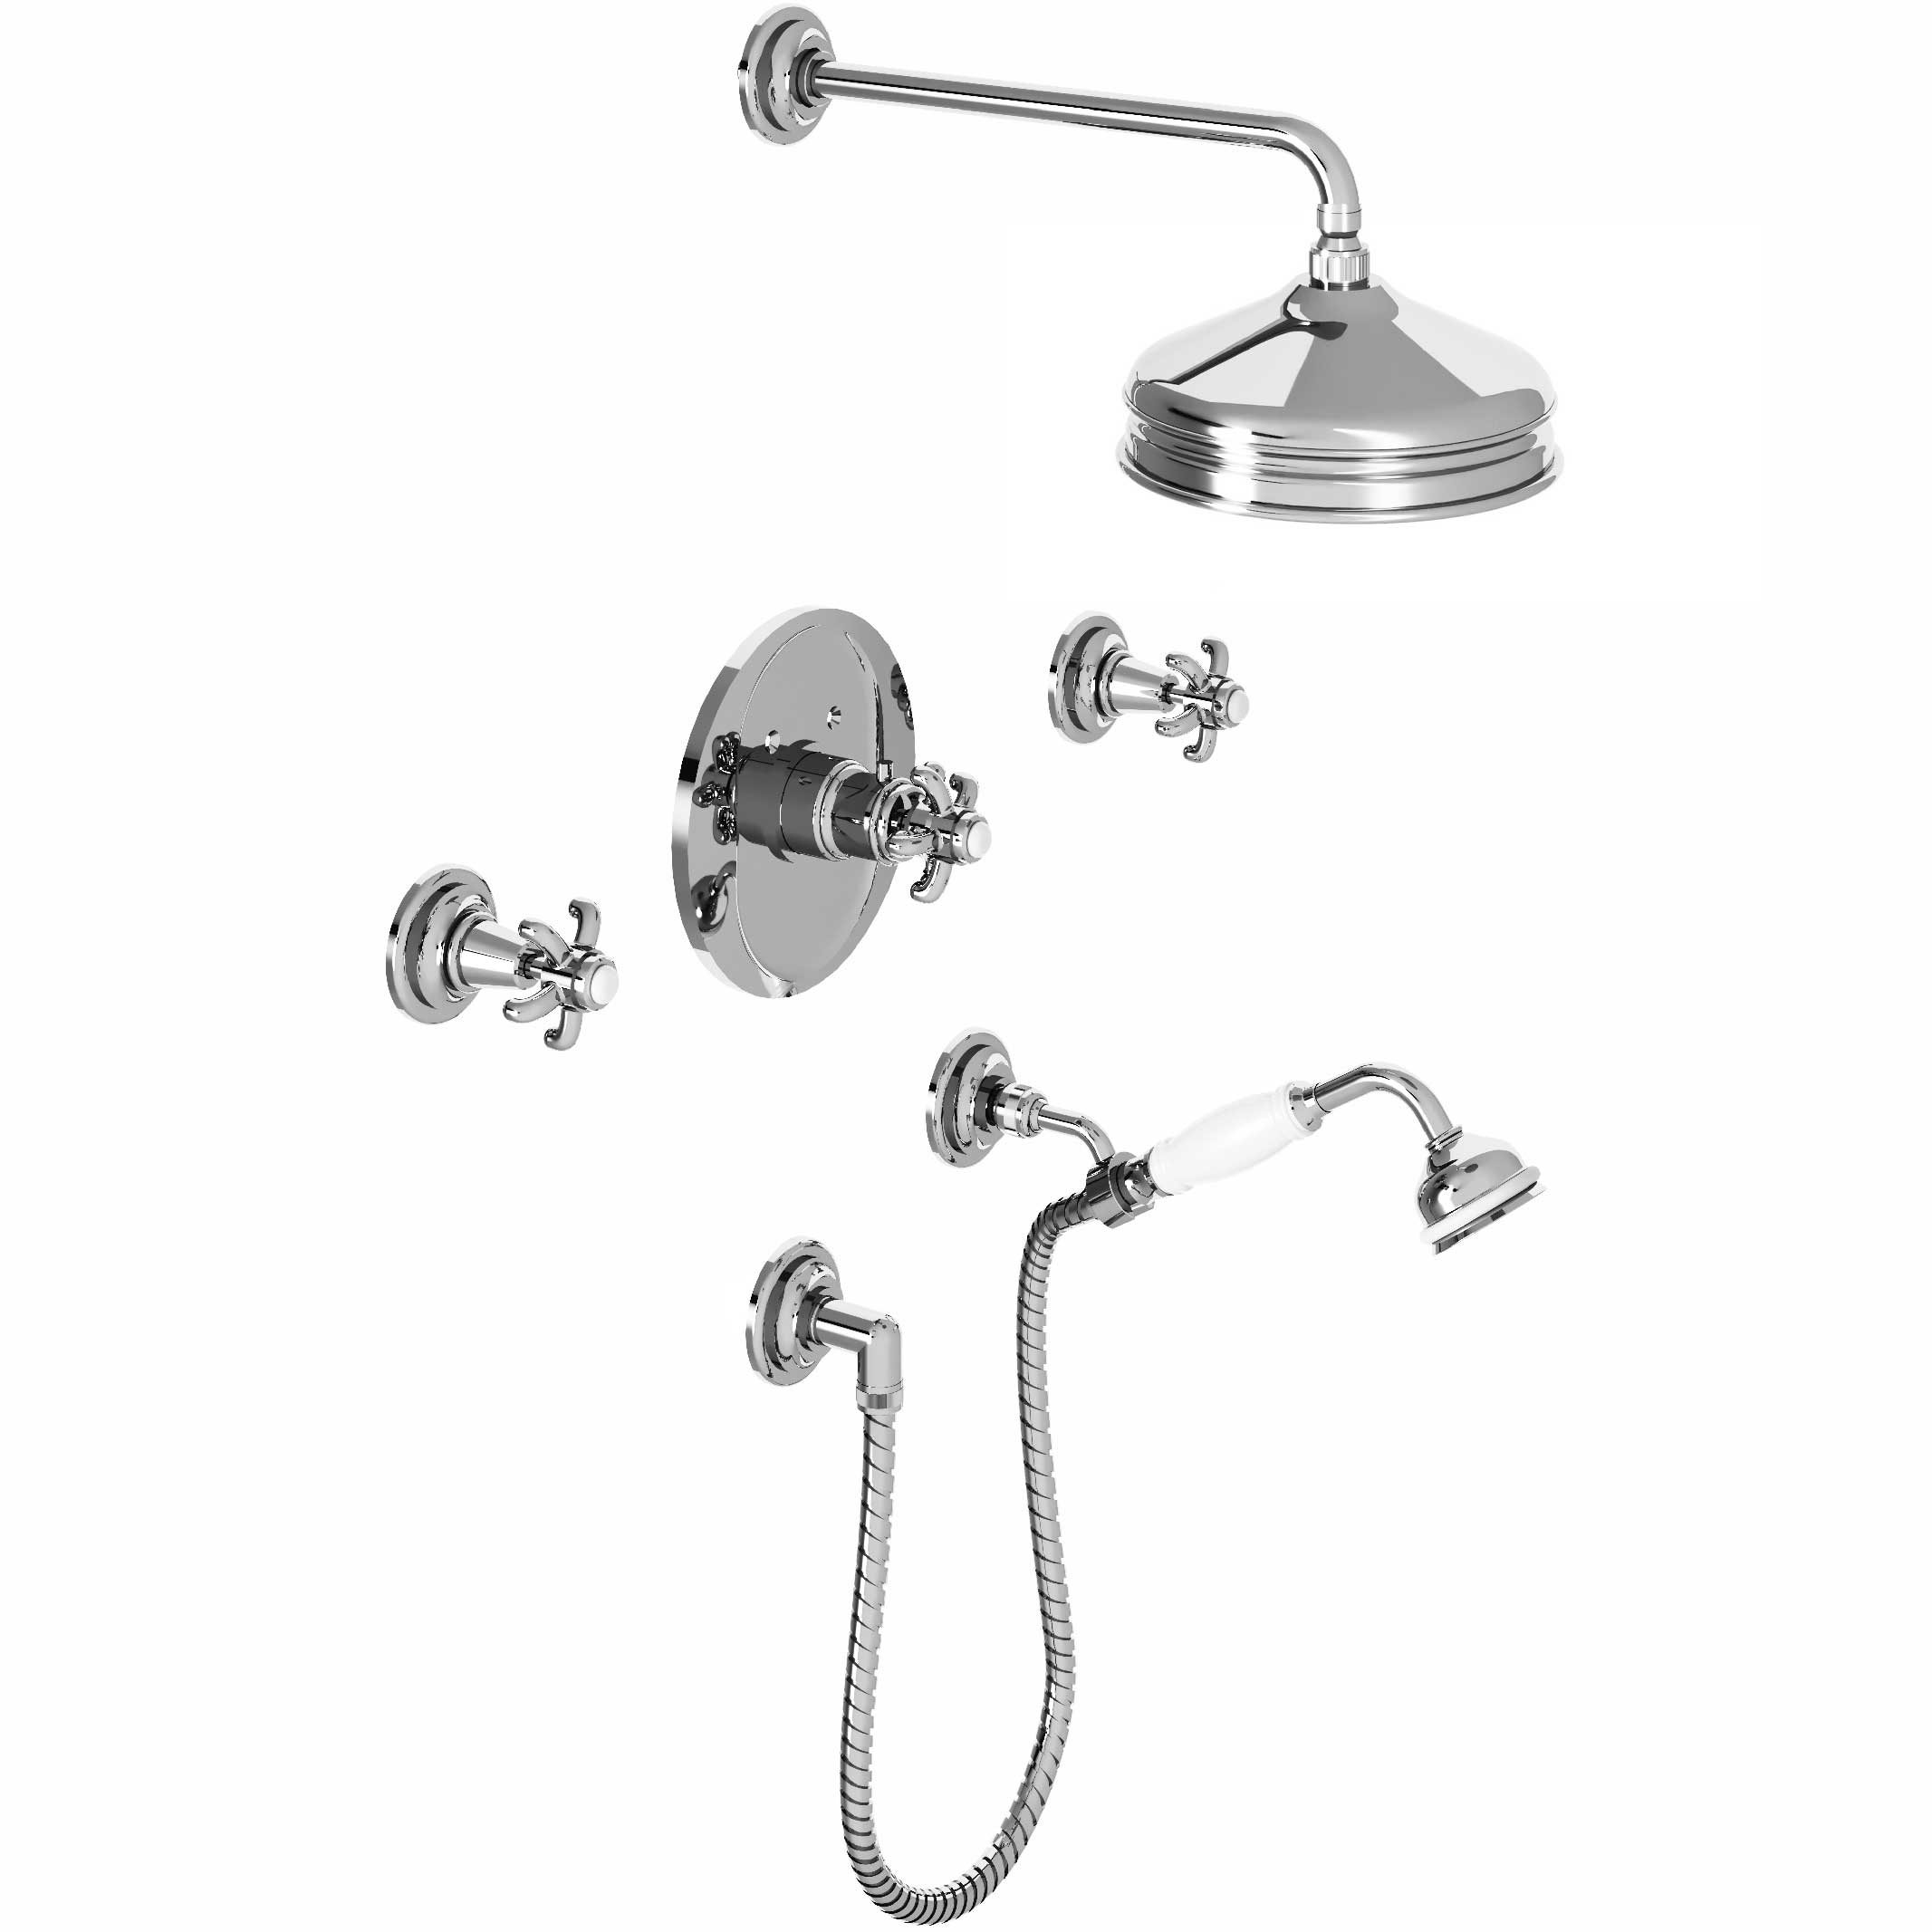 M01-2308T1 Thermostatic shower mixer package